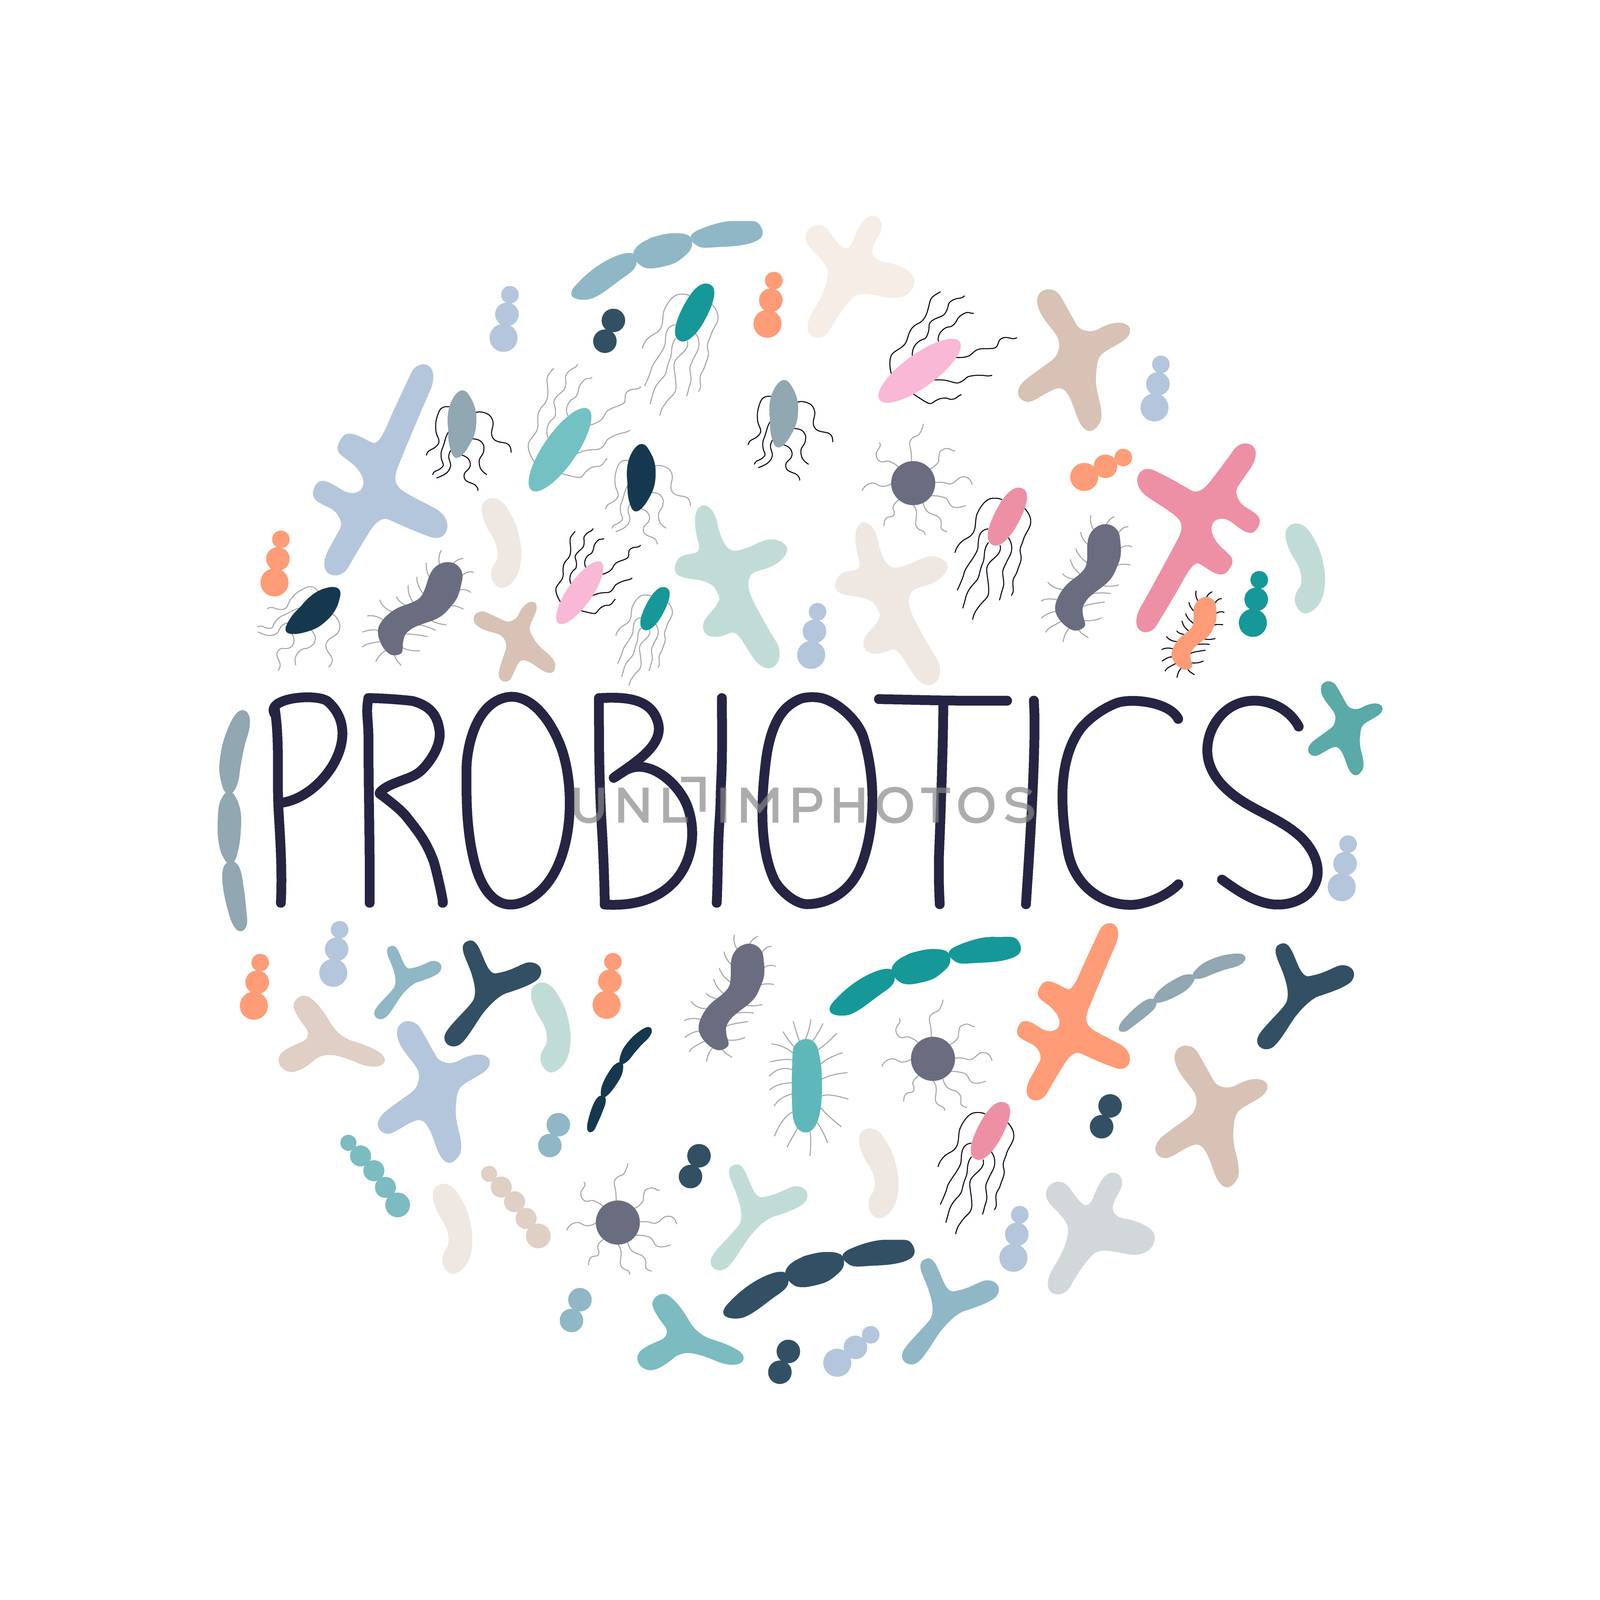 Round shape with good microorganisms and word probiotics. Vector illustration in flat cartoon style. Isolate on white background. Propionibacterium, lactobacillus, lactococcus, bifidobacterium.